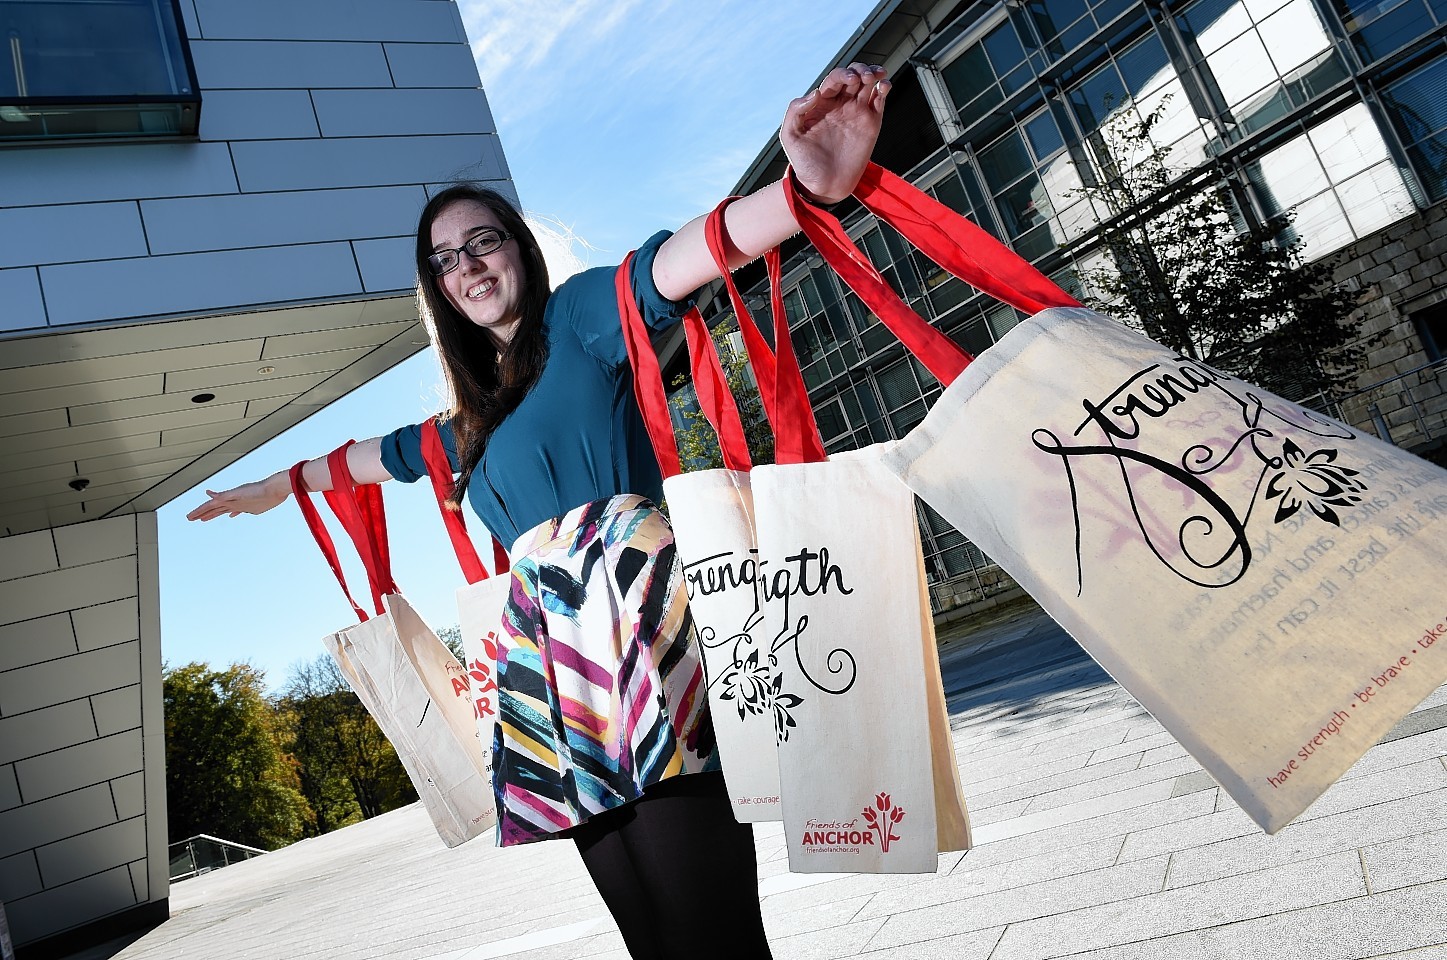 RGU media student Joanna MacQueen launches her newly designed tote bags to raise money for Friends of ANCHOR following their sell-out success at Courage on the Catwalk.